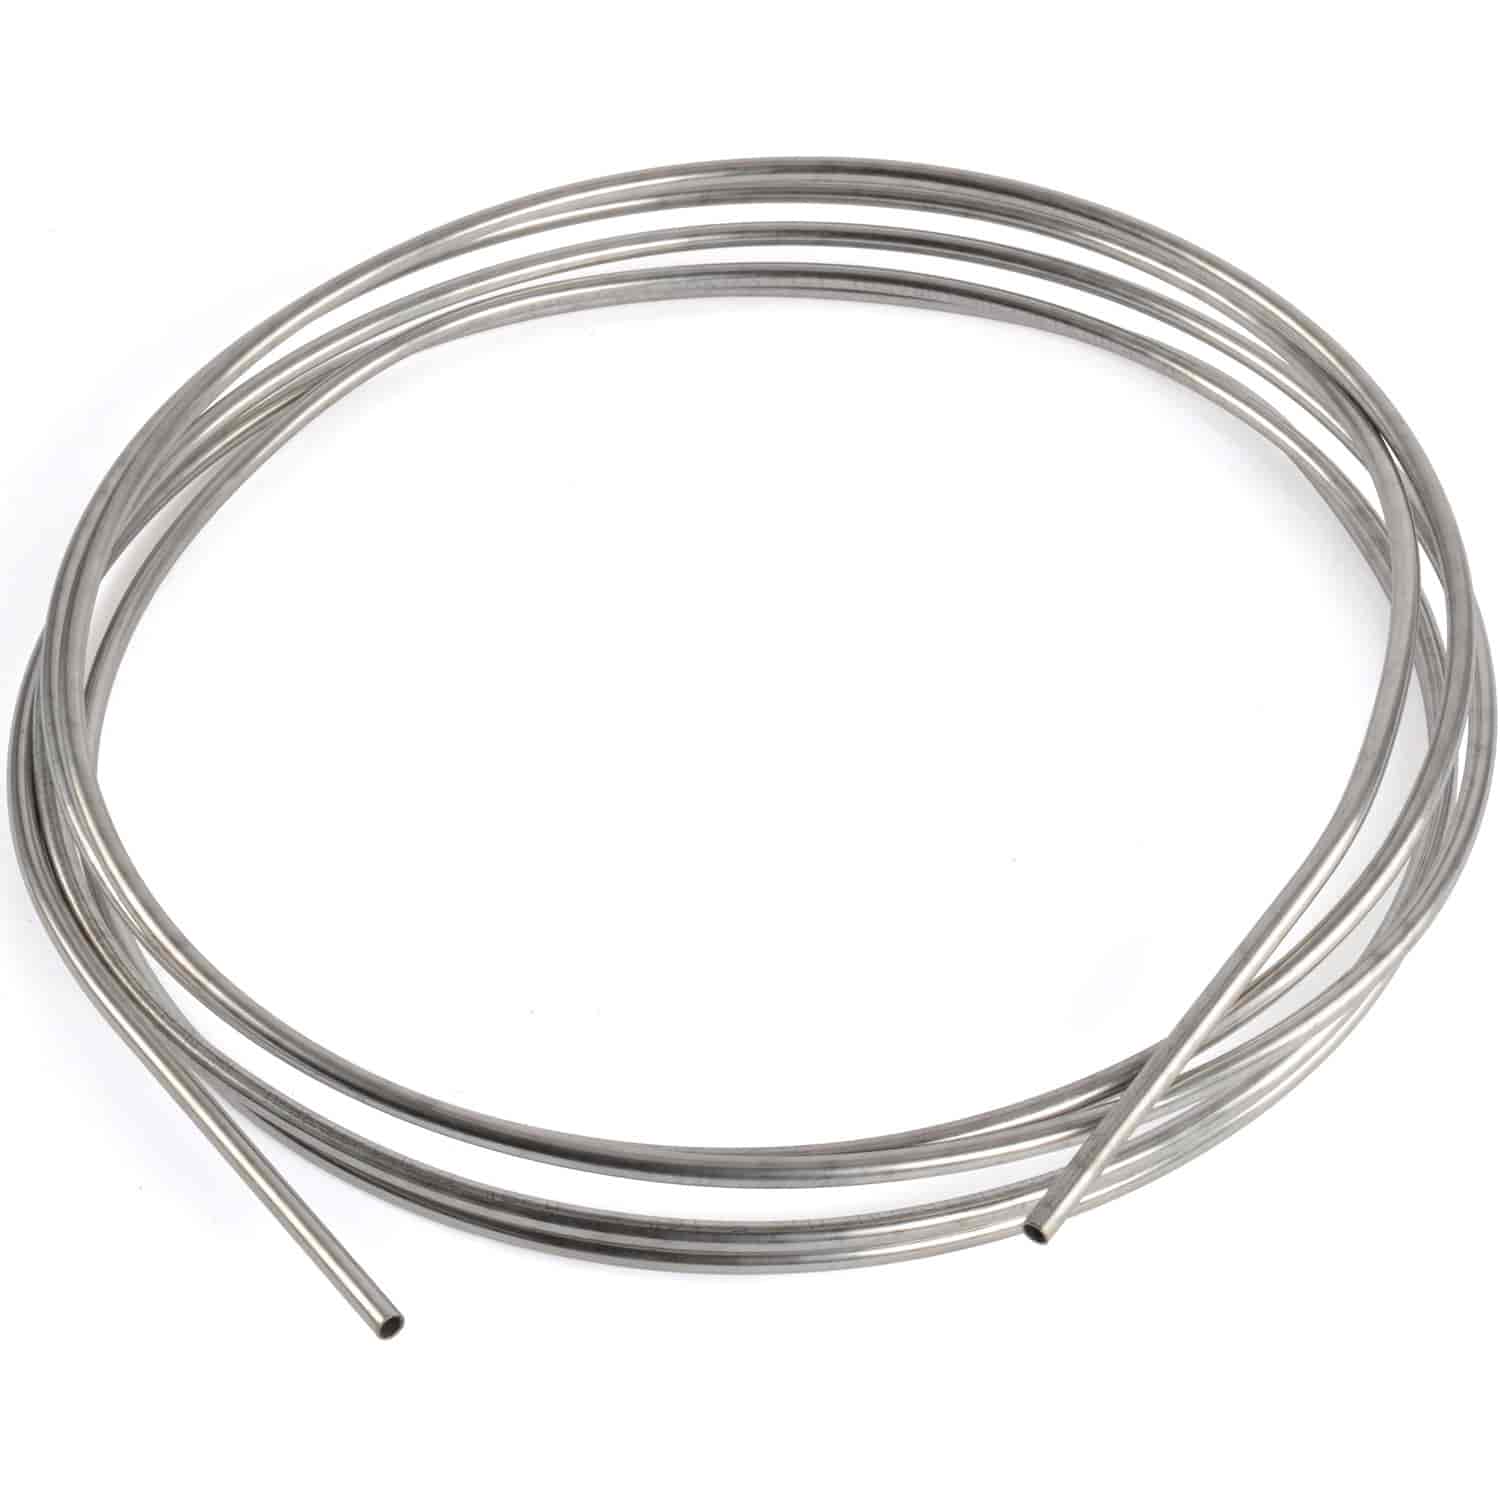 JEGS 555-635202: Stainless Steel Fuel Line Coil, 3/8 in. O.D. x .028 in.  Wall Tubing